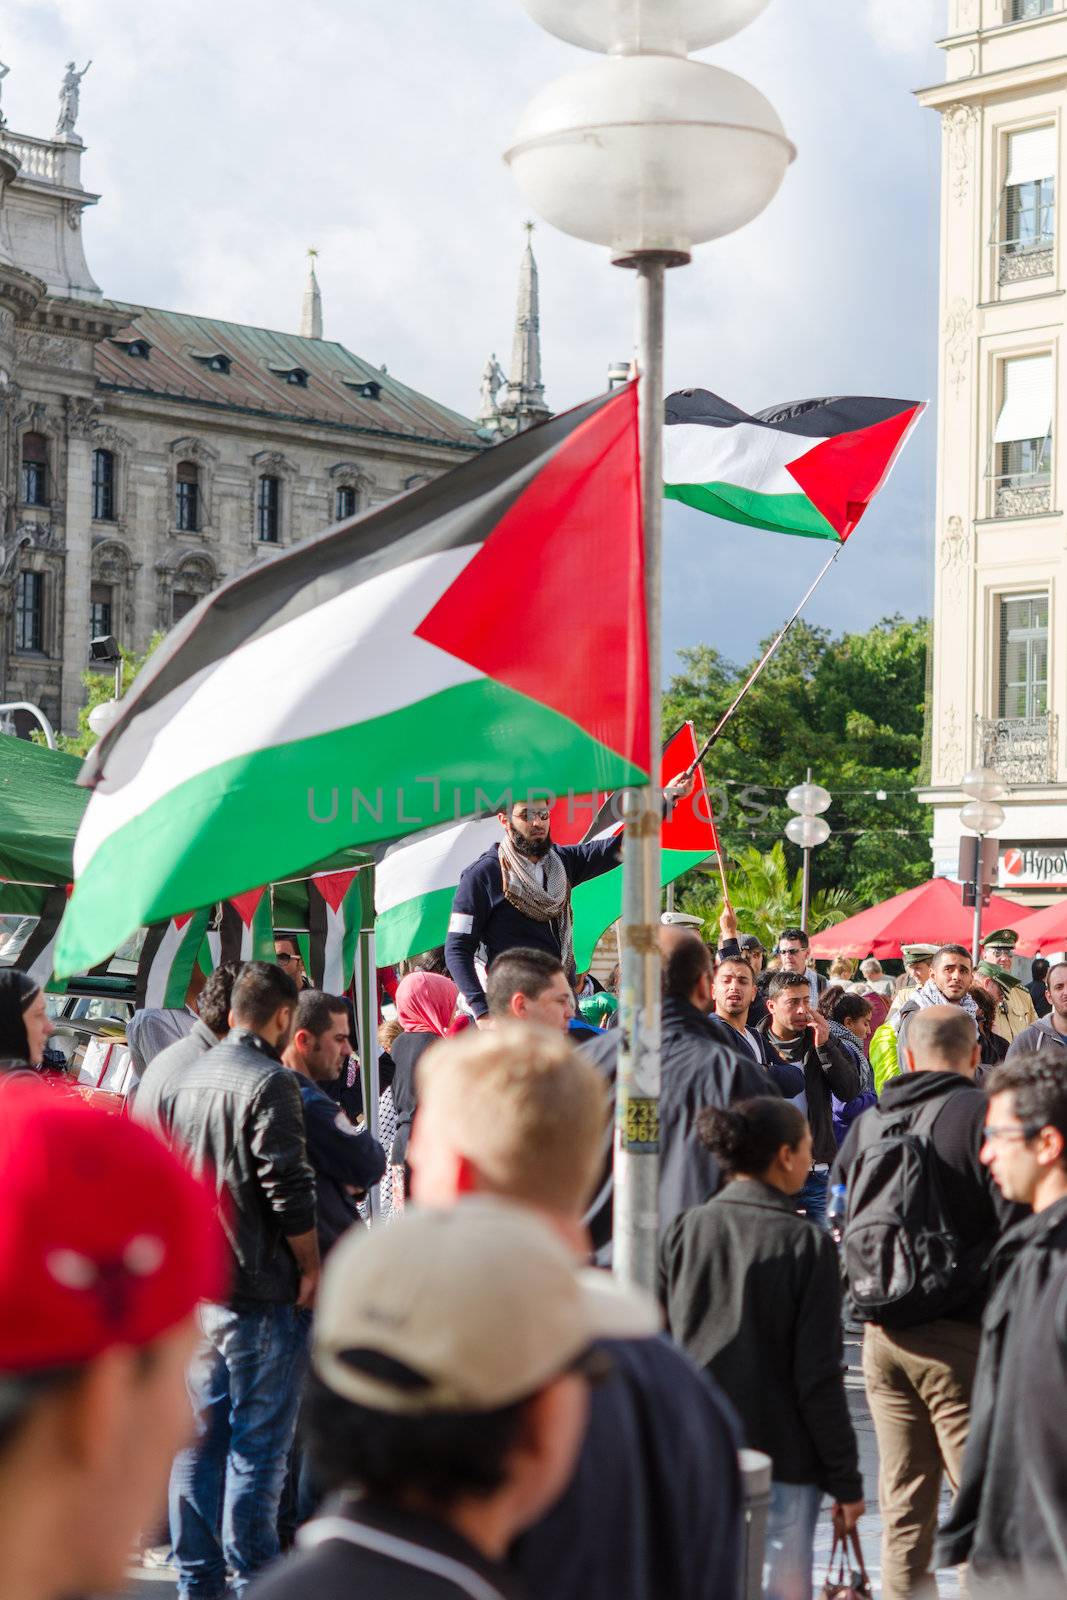 MUNICH, GERMANY - AUGUST 16, 2014: The demonstration in the center of a large European city. Protesters are demanding a peaceful solution to the Arab-Israeli conflict, the cease-fire in Gaza and the liberation of occupied Palestinian territories.